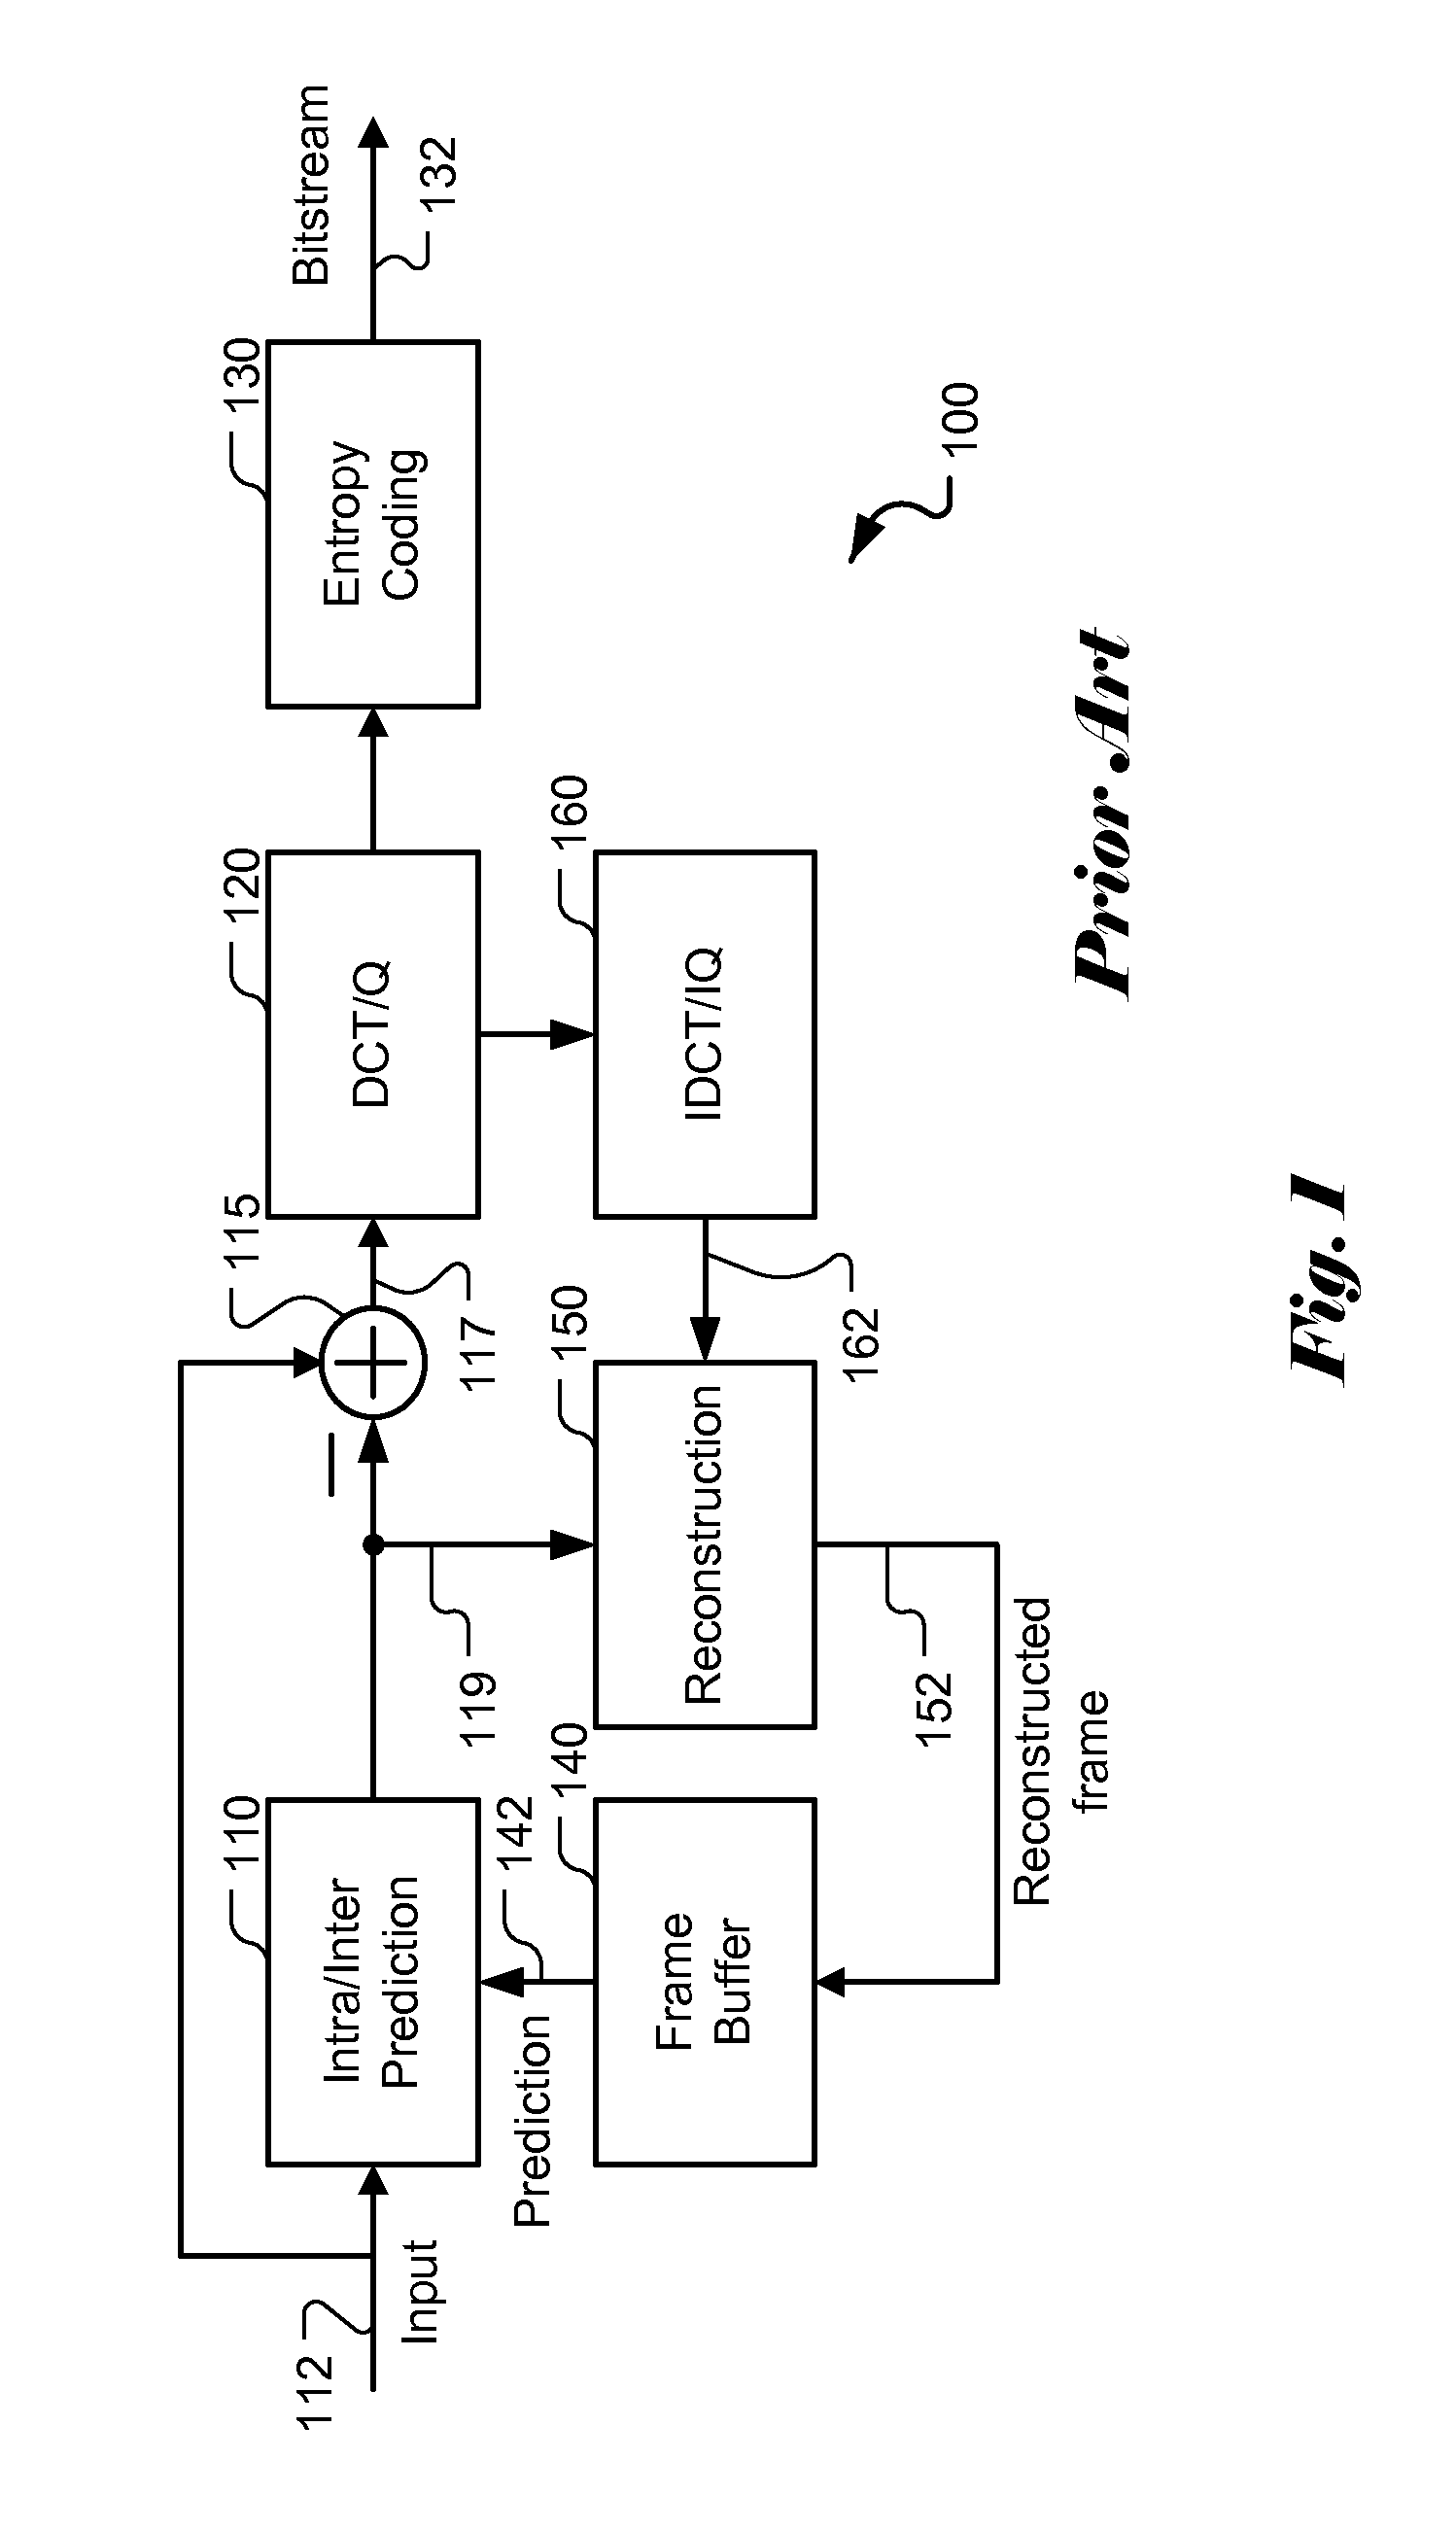 Coding unit synchronous adaptive loop filter flags